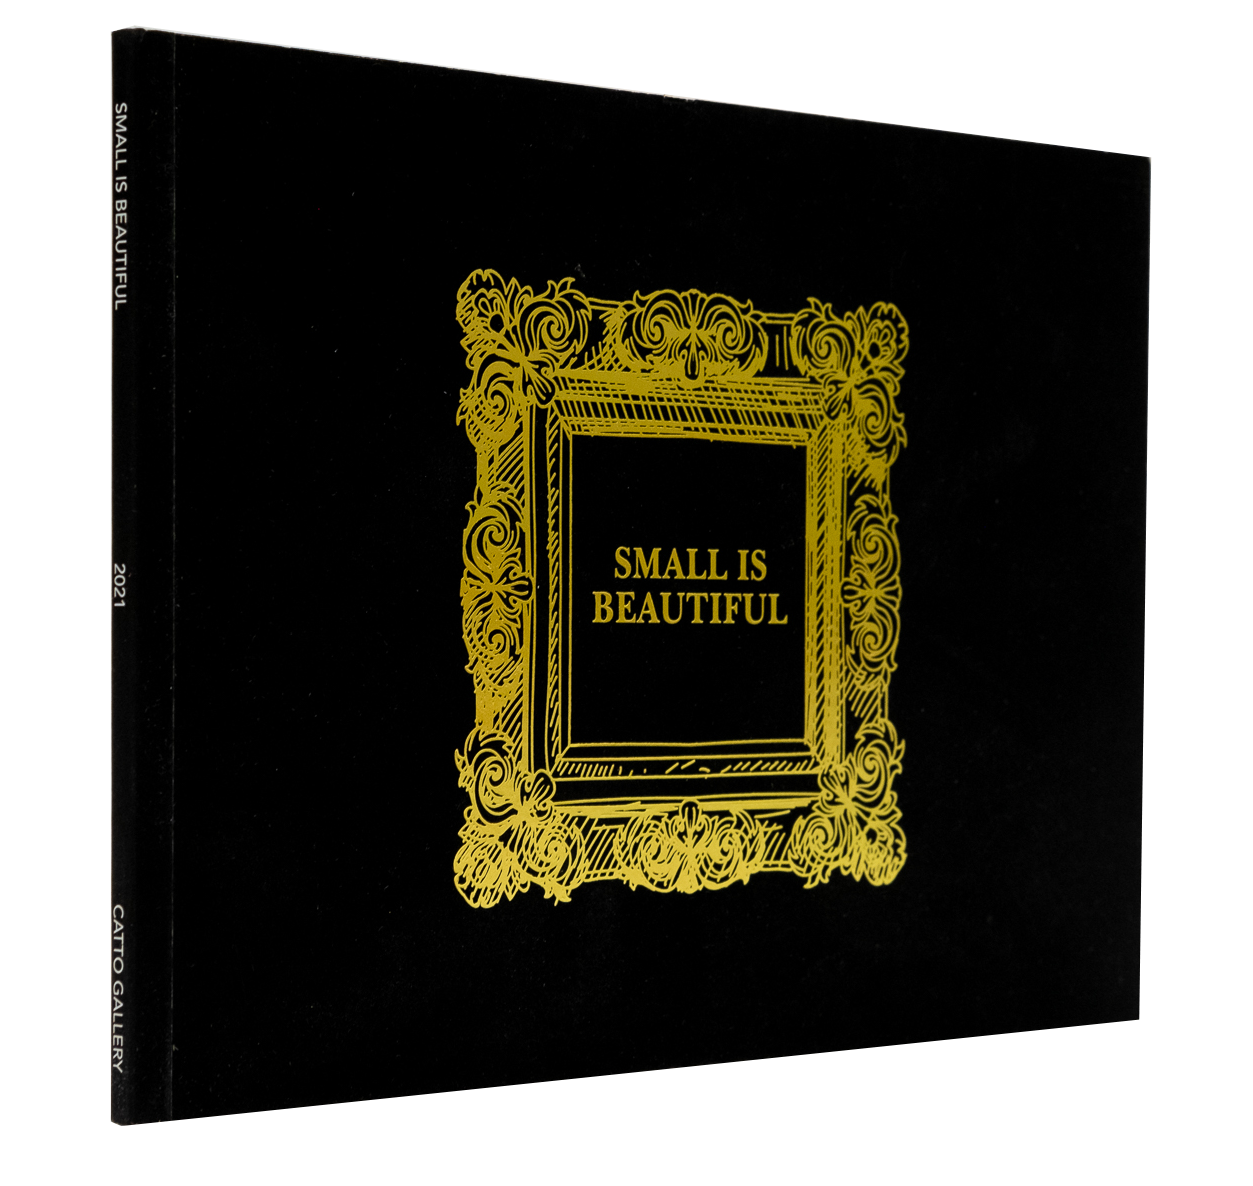 custom printed perfect bound book with gold foil on cover